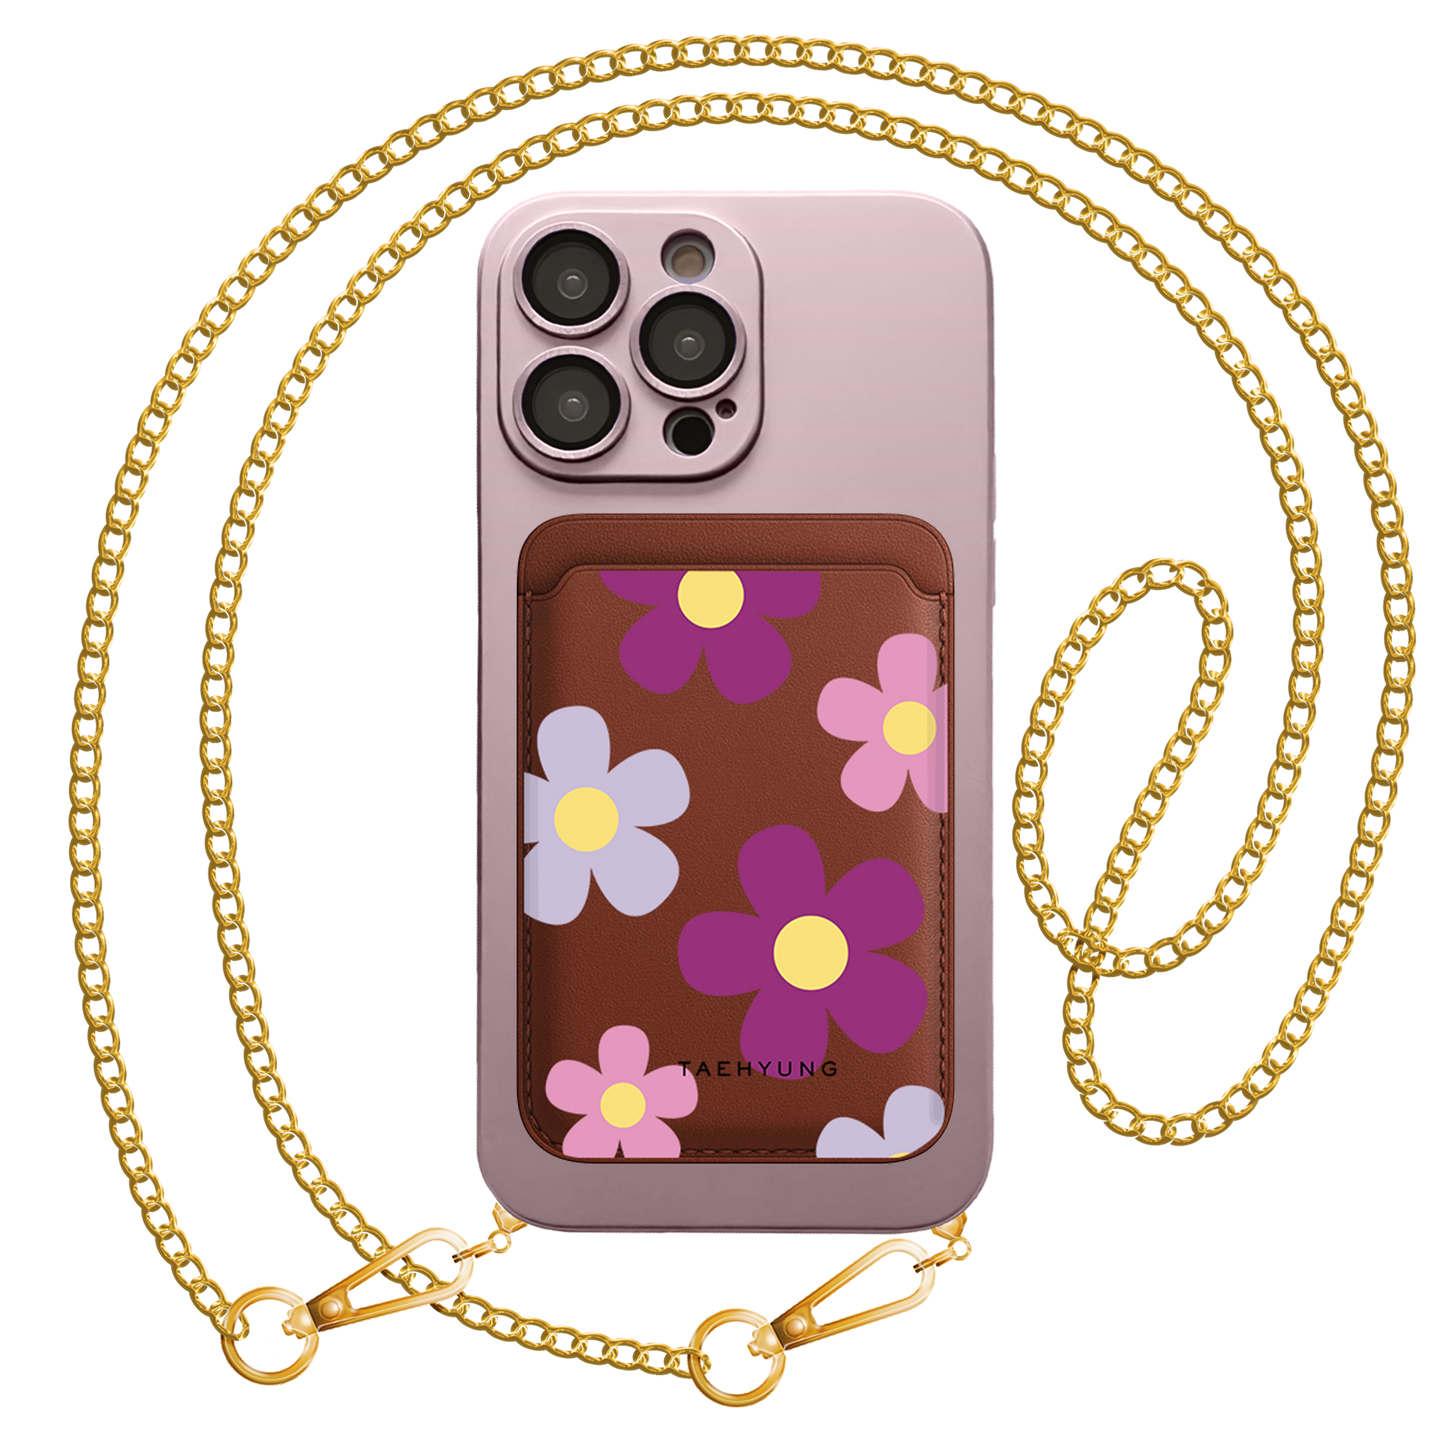 iPhone Magnetic Wallet Silicone Case - Daisy Paradise